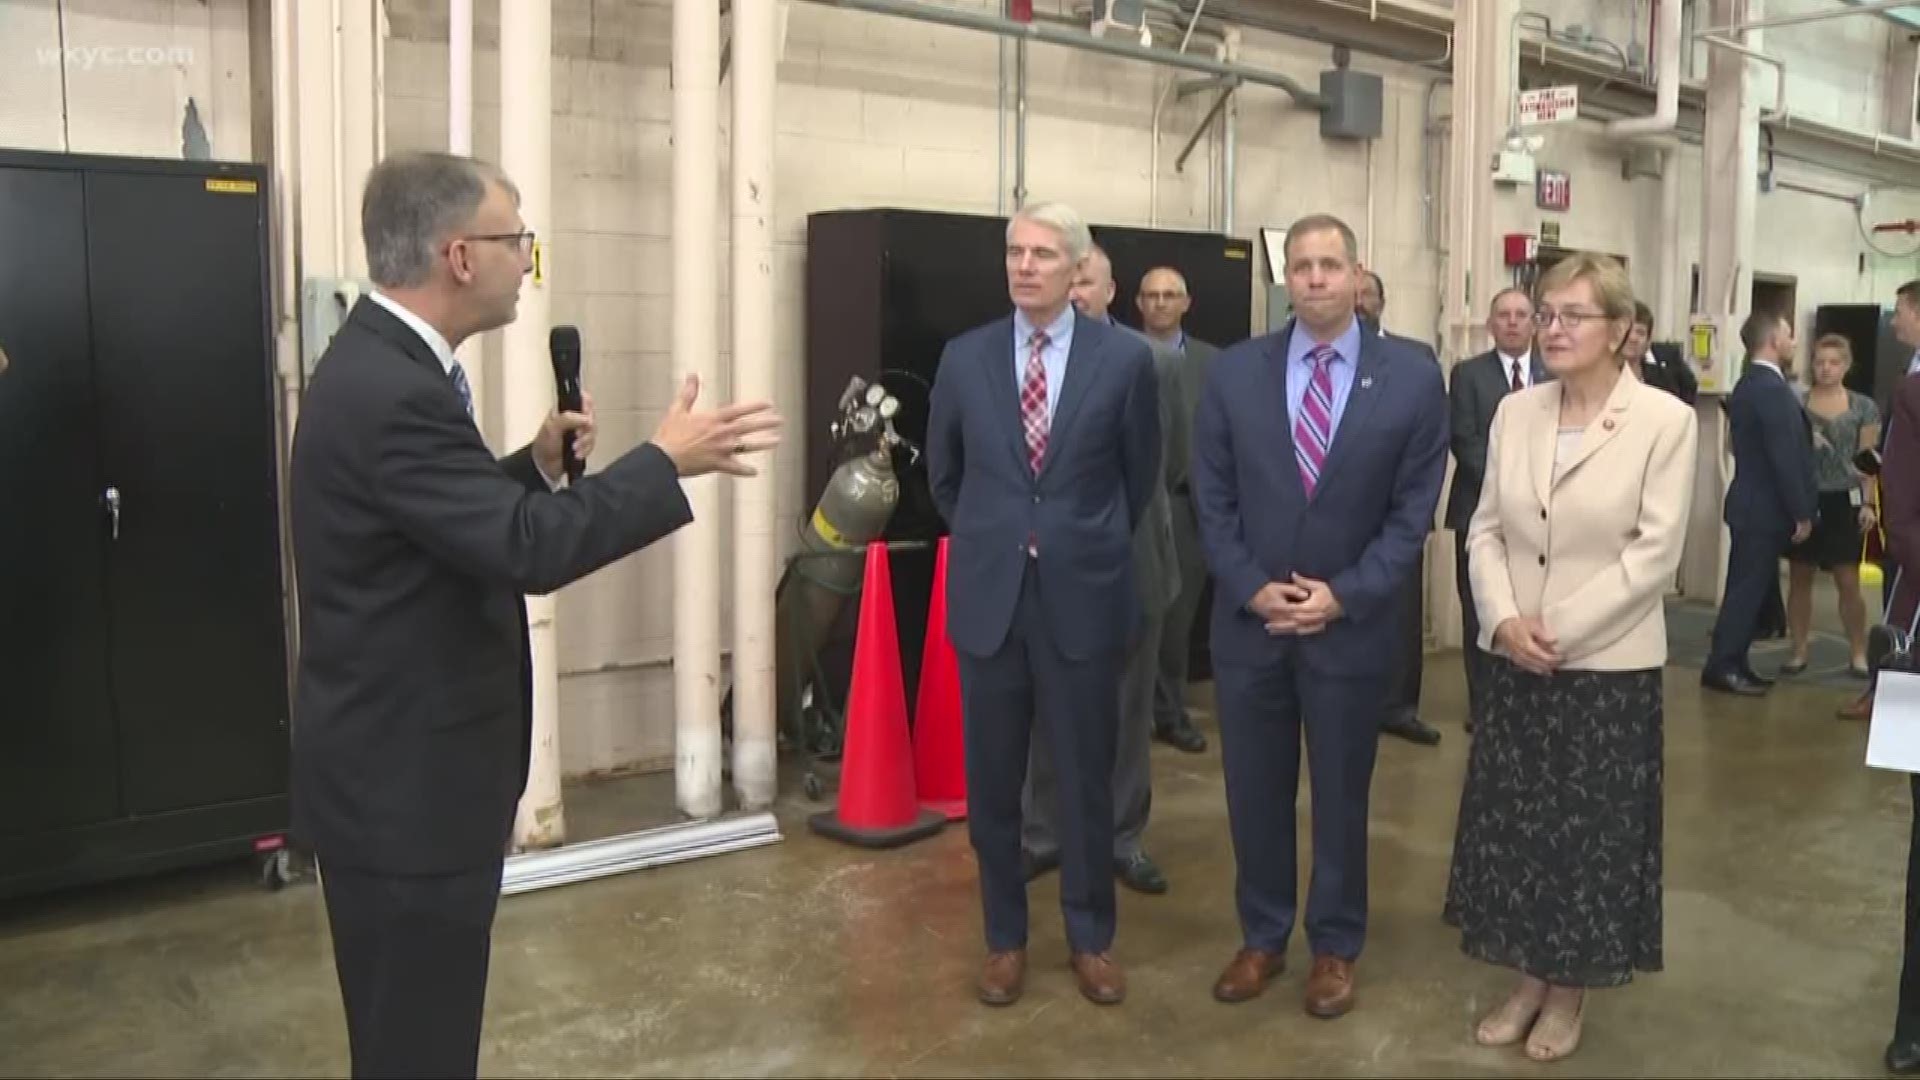 NASA hosted Congresswoman Marcy Kaptur and Senator Rob Portman to show off the progress they are making towards returning to the Moon in 2024.